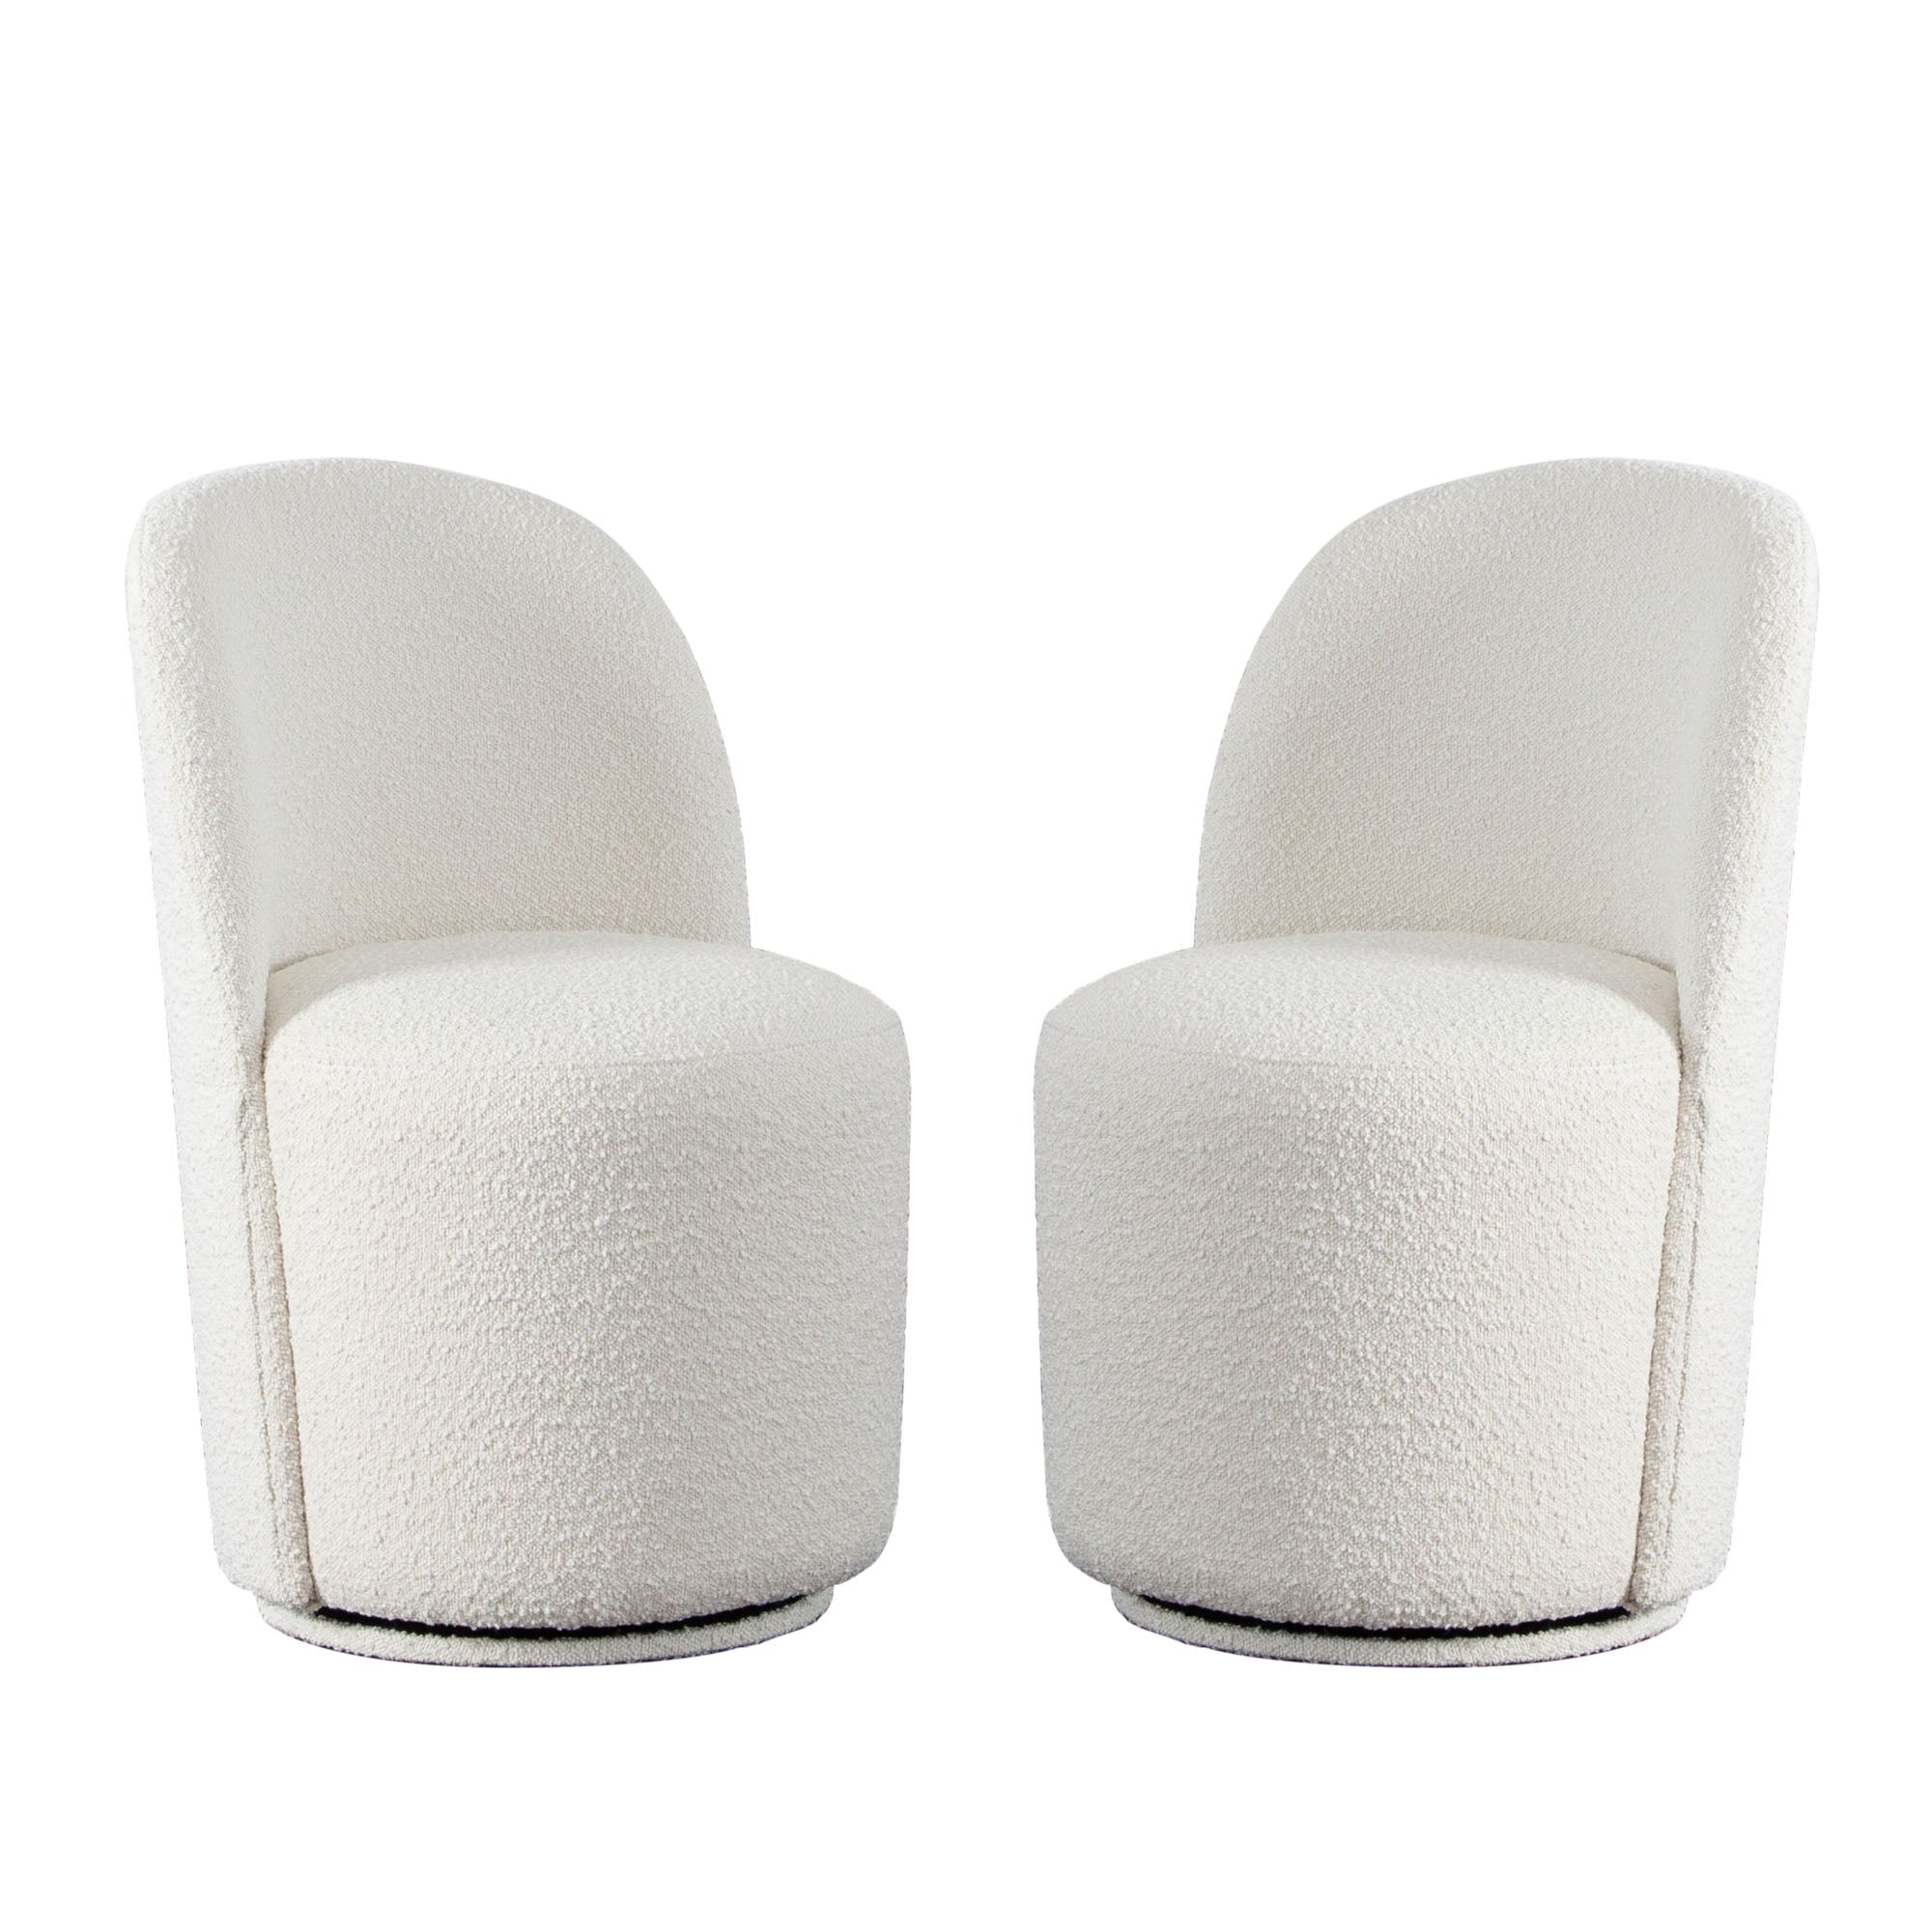 Kendall Dining Chair in Ivory Boucle - Set of 2